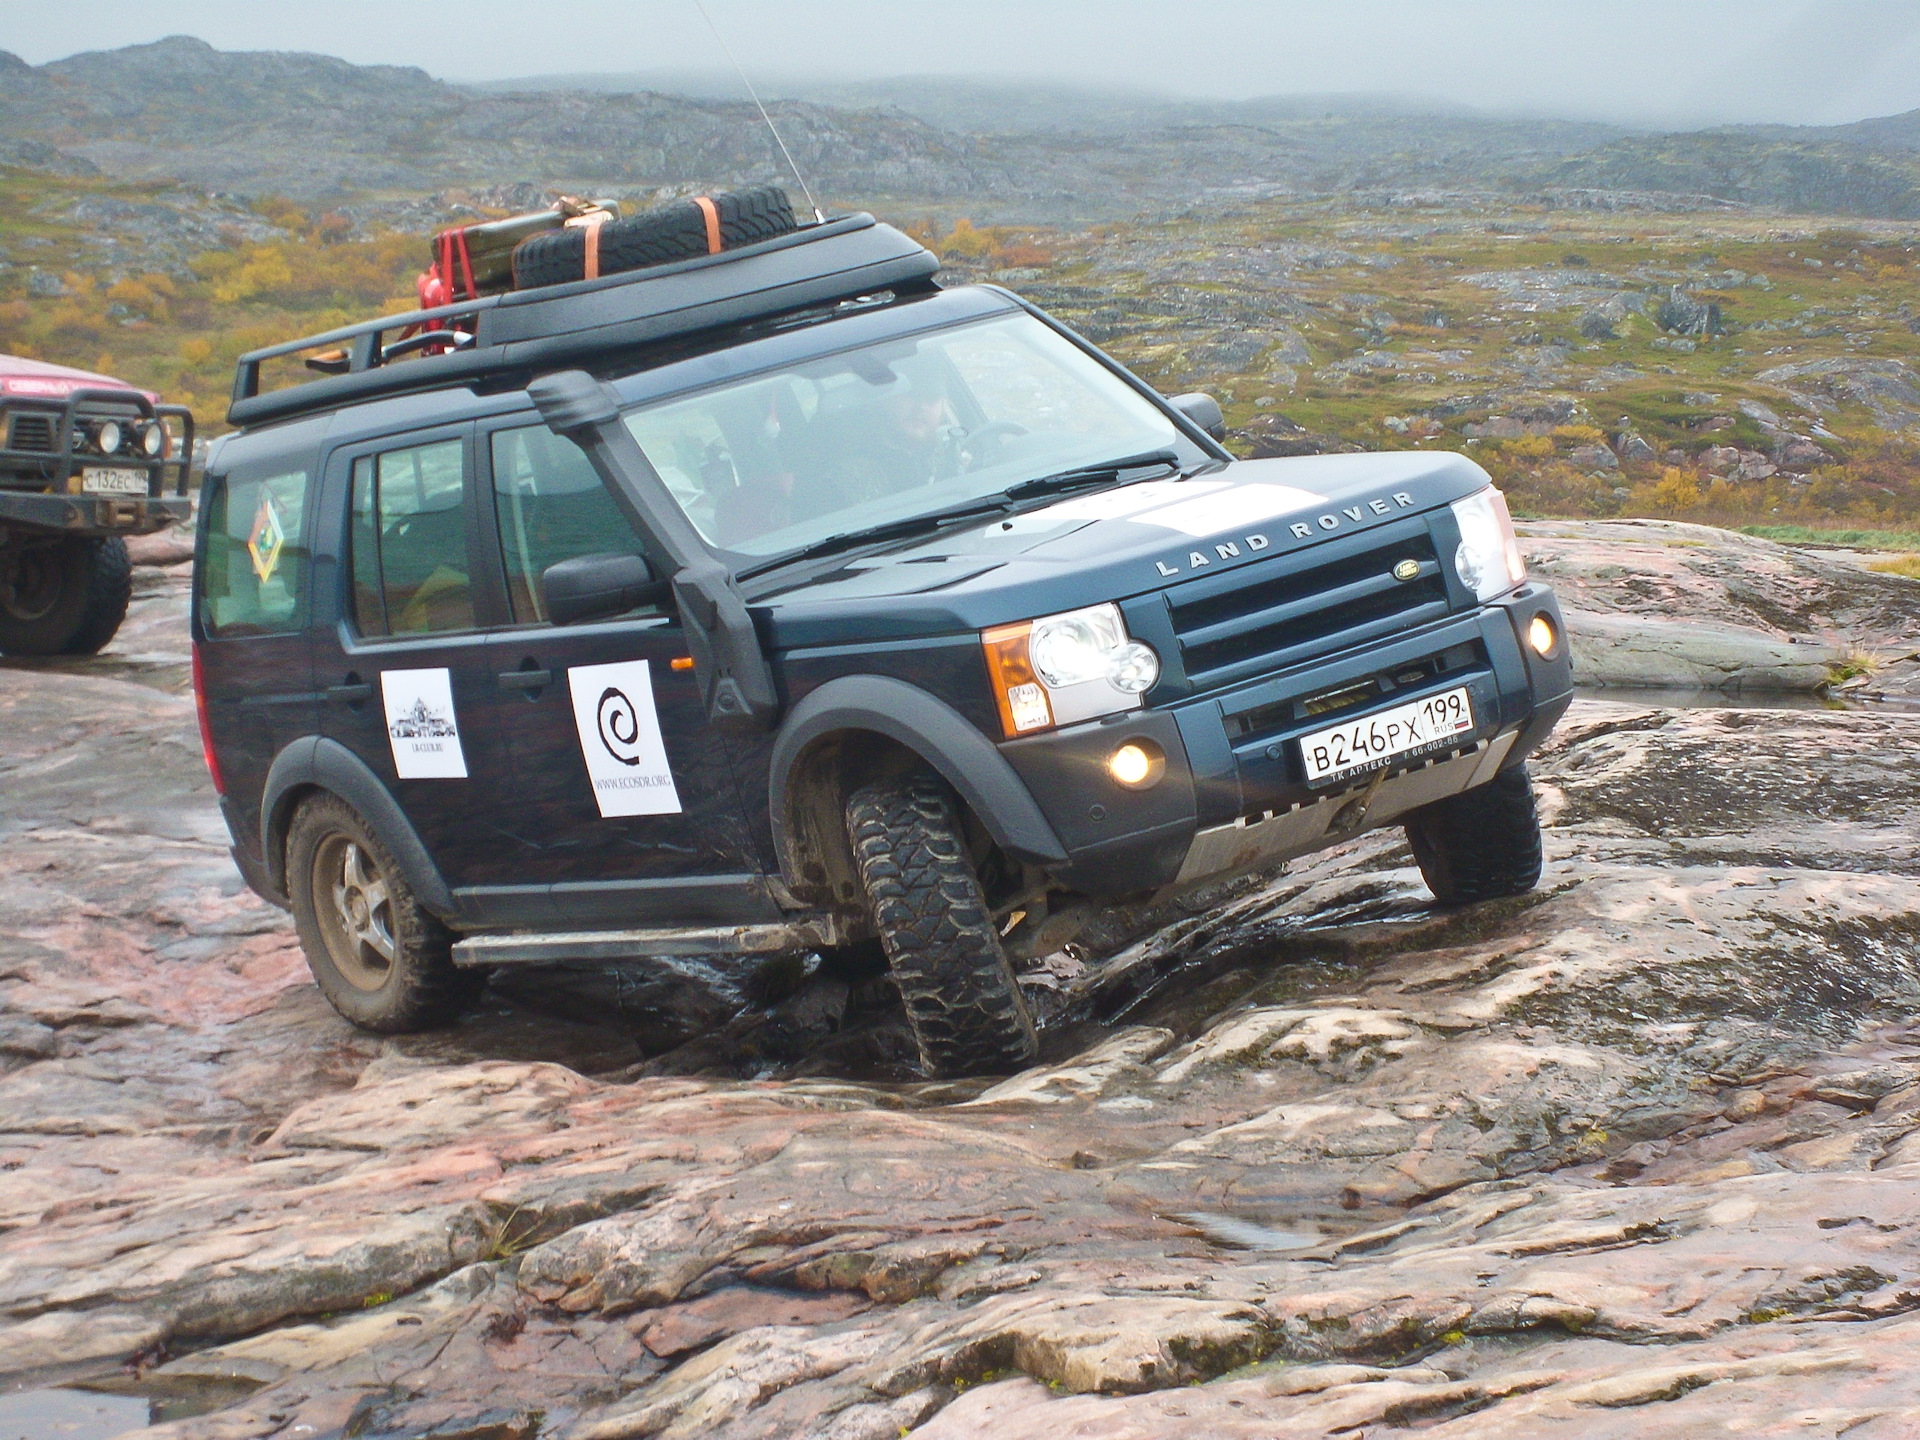 Подготовка к экспедиции. Land Rover Discovery 3 Offroad. Ленд Ровер Дискавери 4 Expedition. Land Rover Discovery 4 Экспедиция. Ленд Ровер Дискавери 2 Expedition.